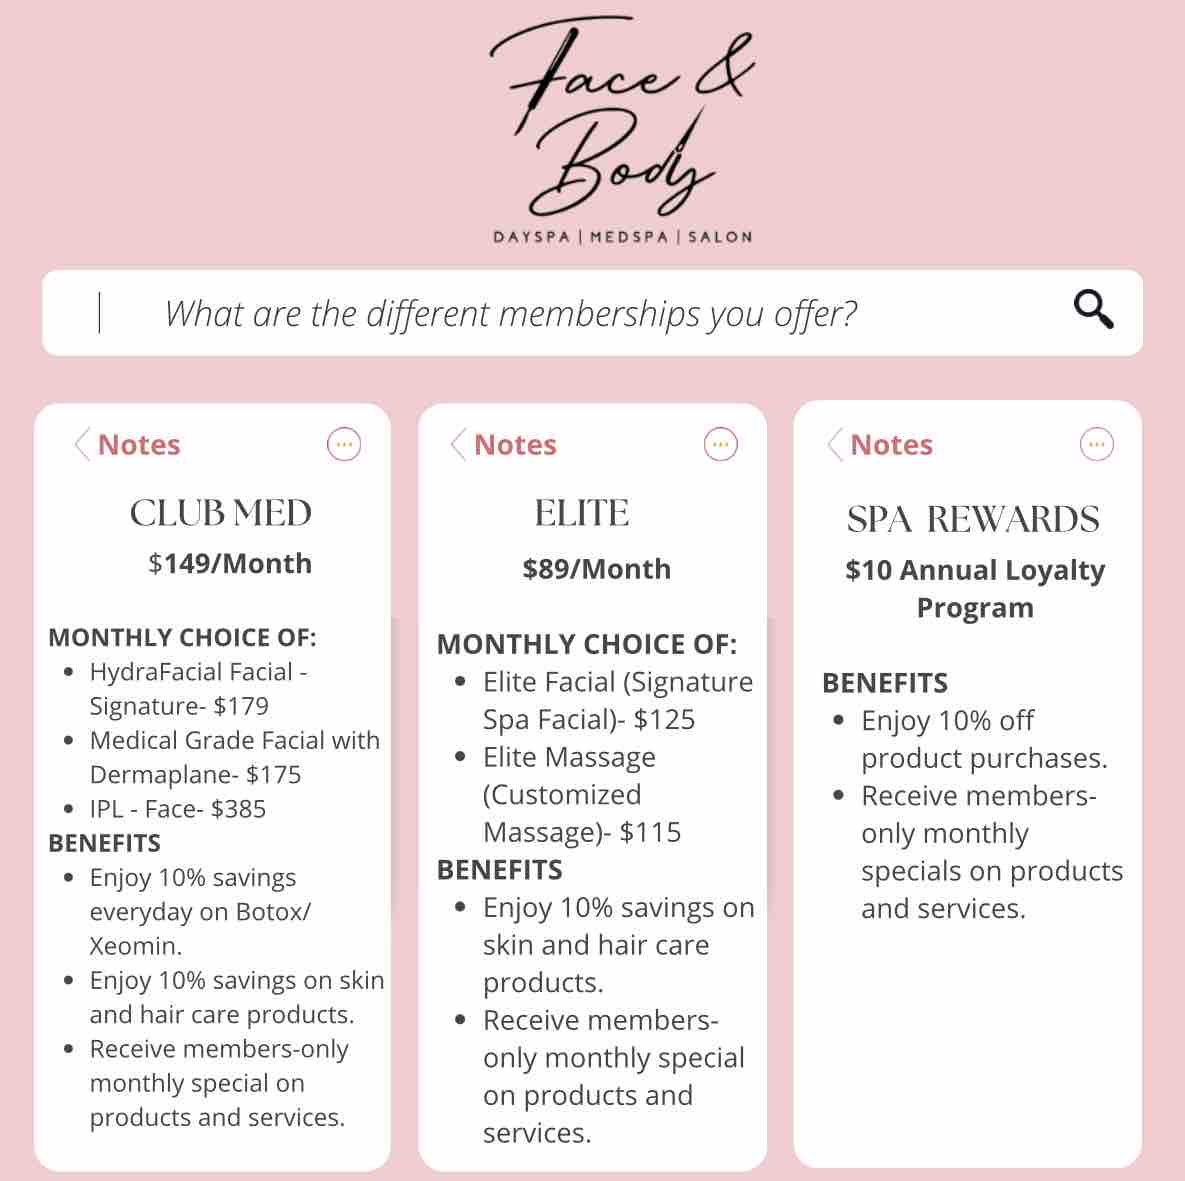 Invest in your self-care and see how you can save!!💸
Our memberships include one of a kind discounts that you don’t want to miss! 
Call 314.725.8975 or visit faceandbodyspa.com 
#faceandbody #medicalspa #stlouismo #rewardsprogram #salon #membership #savings